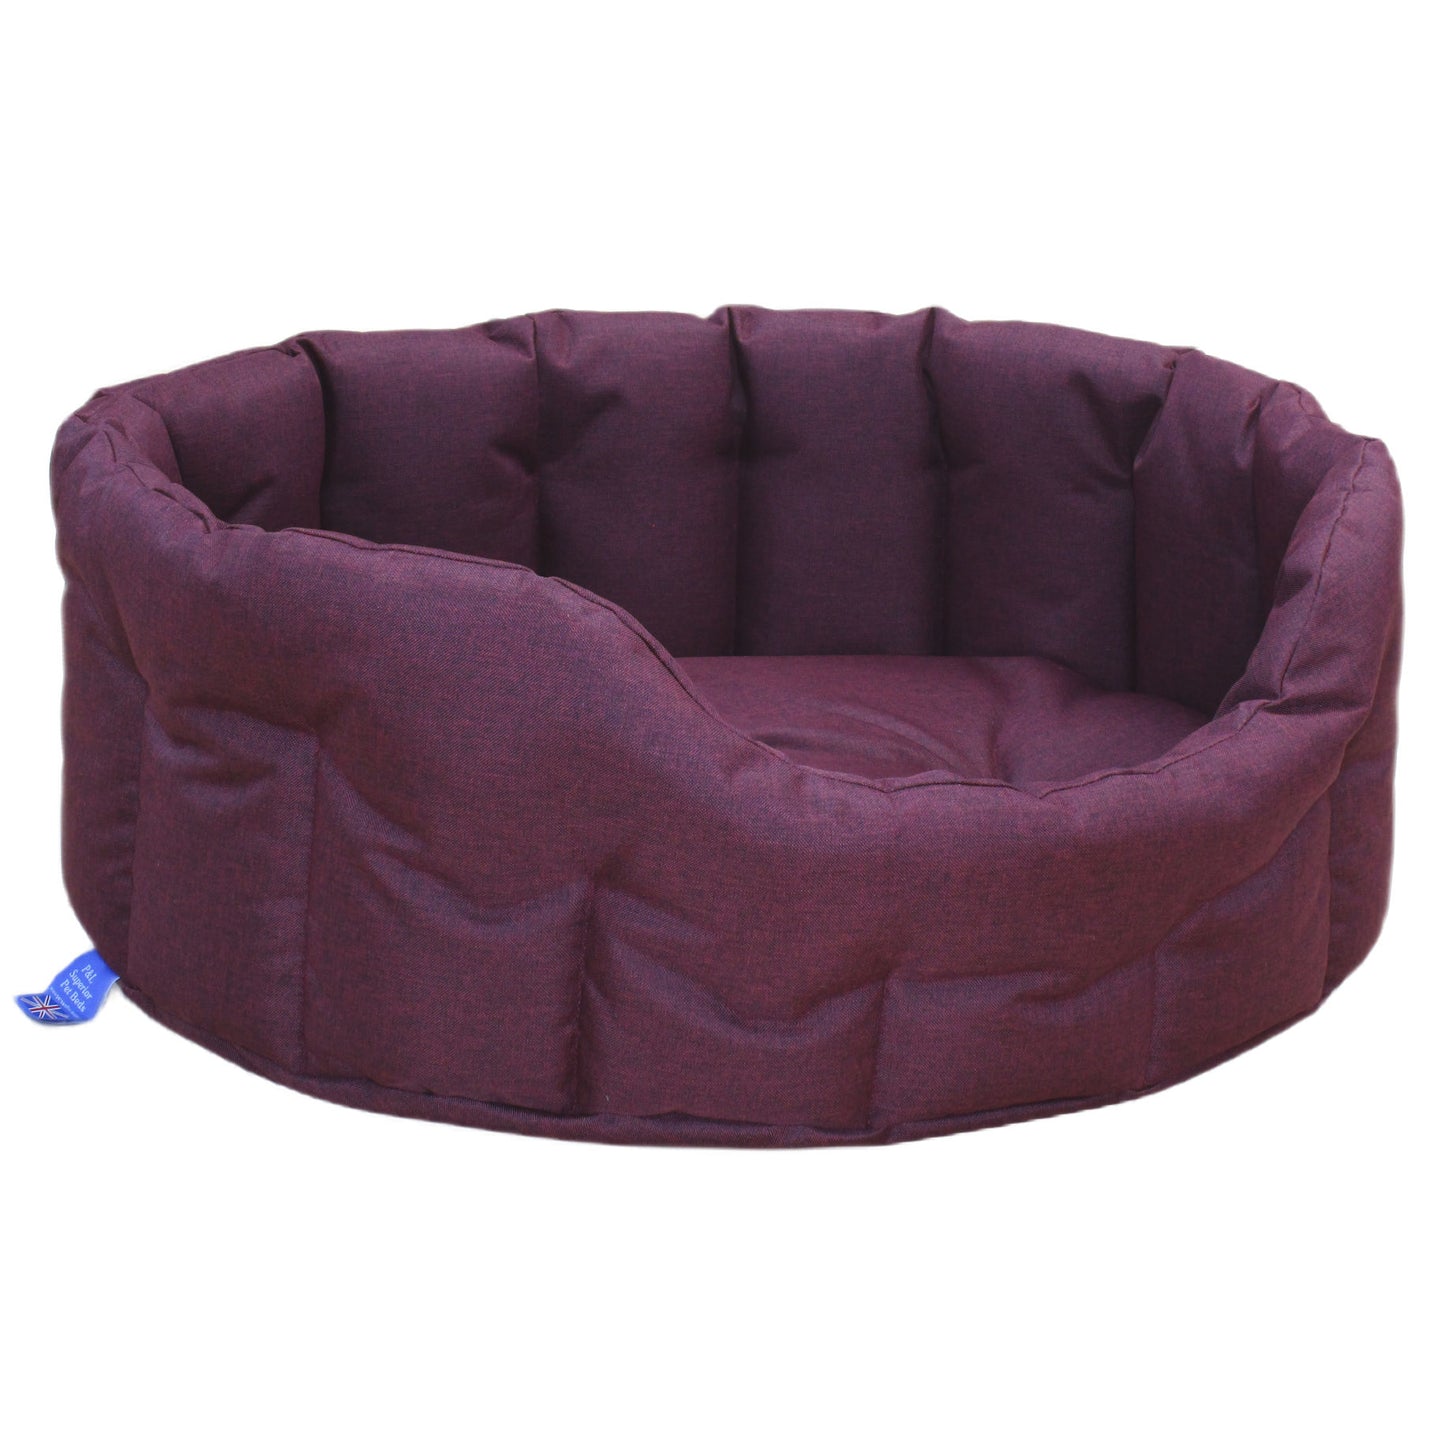 P&L Country Dog Heavy Duty Oval Drop Fronted Waterproof Softee Dog Bed